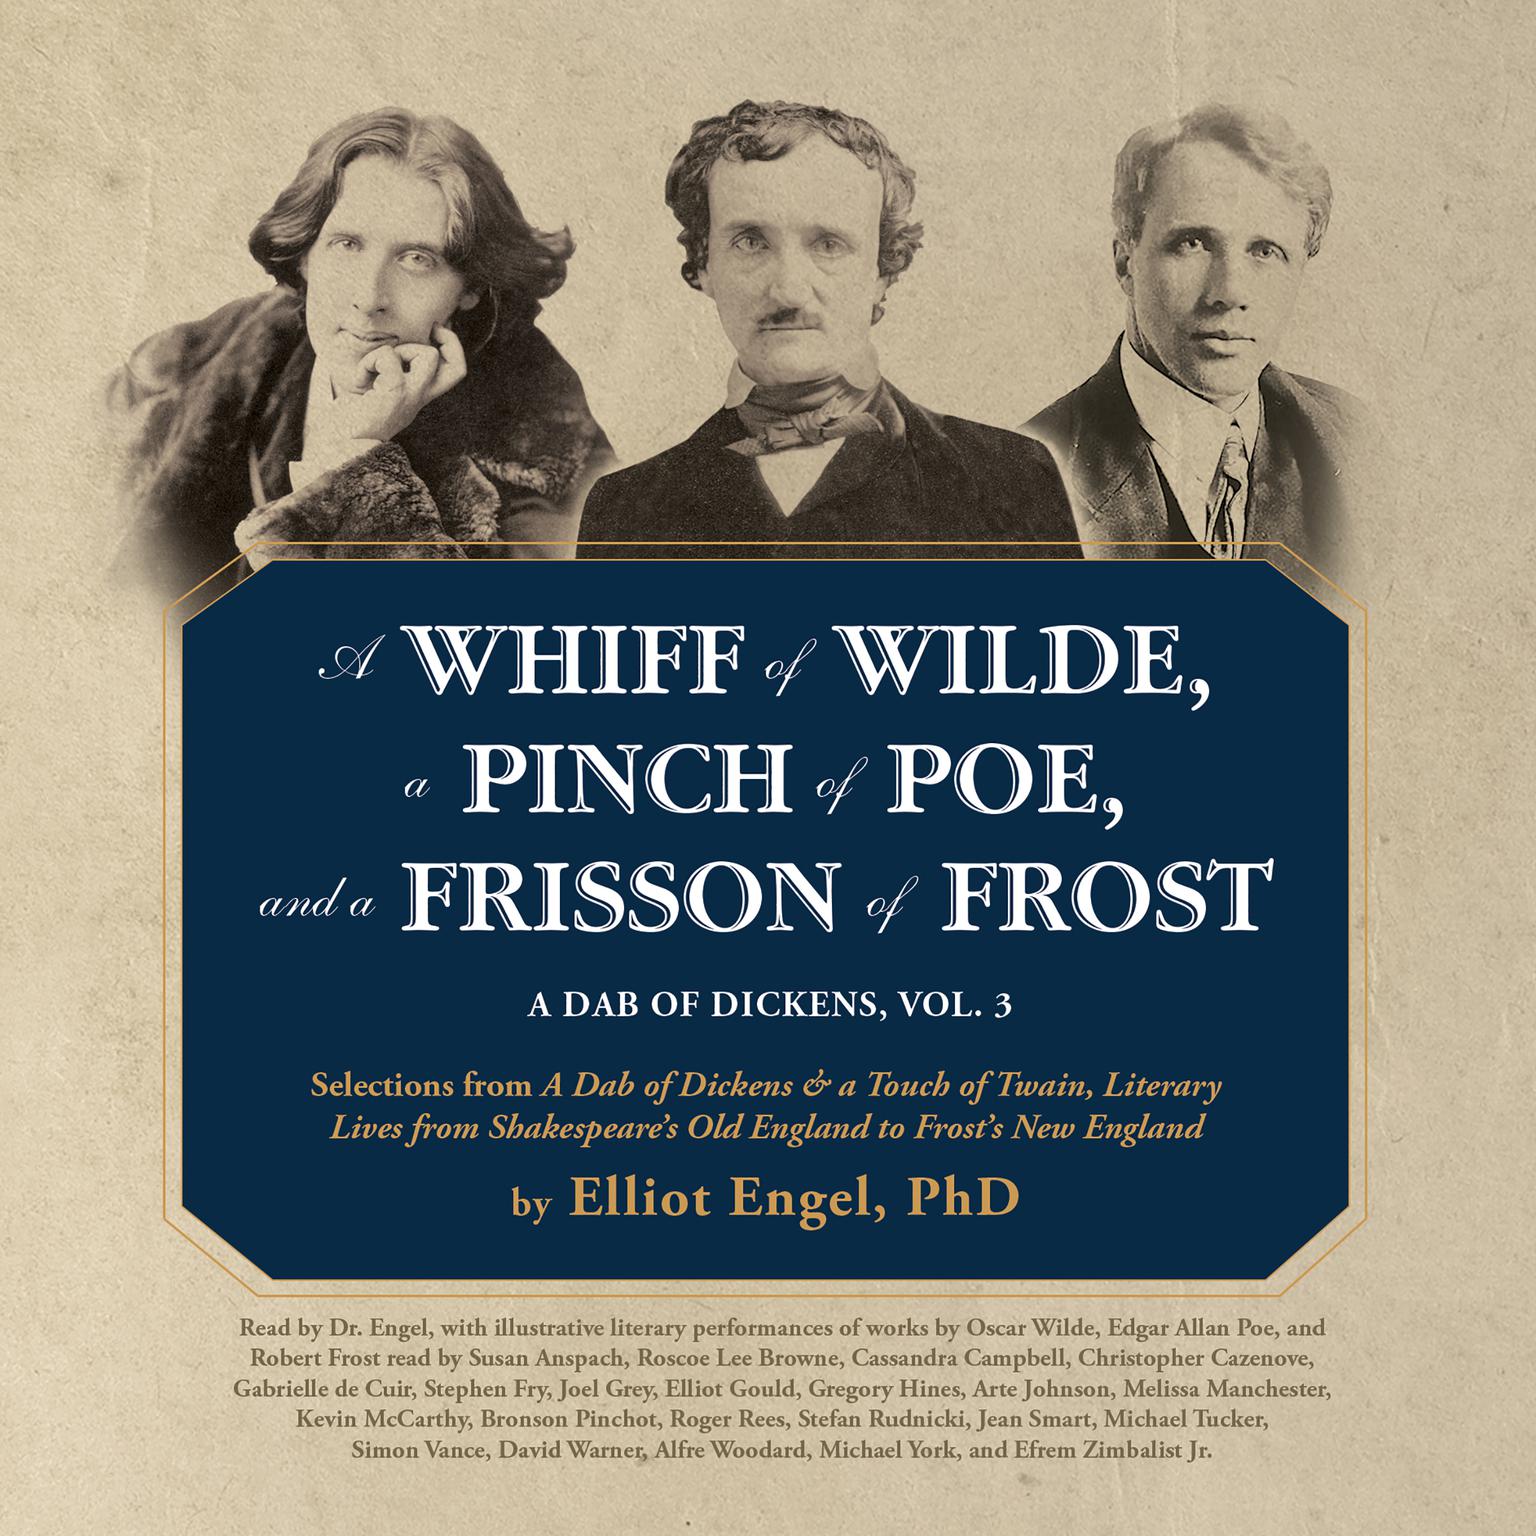 A Whiff of Wilde, a Pinch of Poe, and a Frisson of Frost: A Dab of Dickens, Vol. 3; Selections from A Dab of Dickens & a Touch of Twain,Literary Lives from Shakespeare’s Old England to Frost’s New England Audiobook, by Elliot Engel